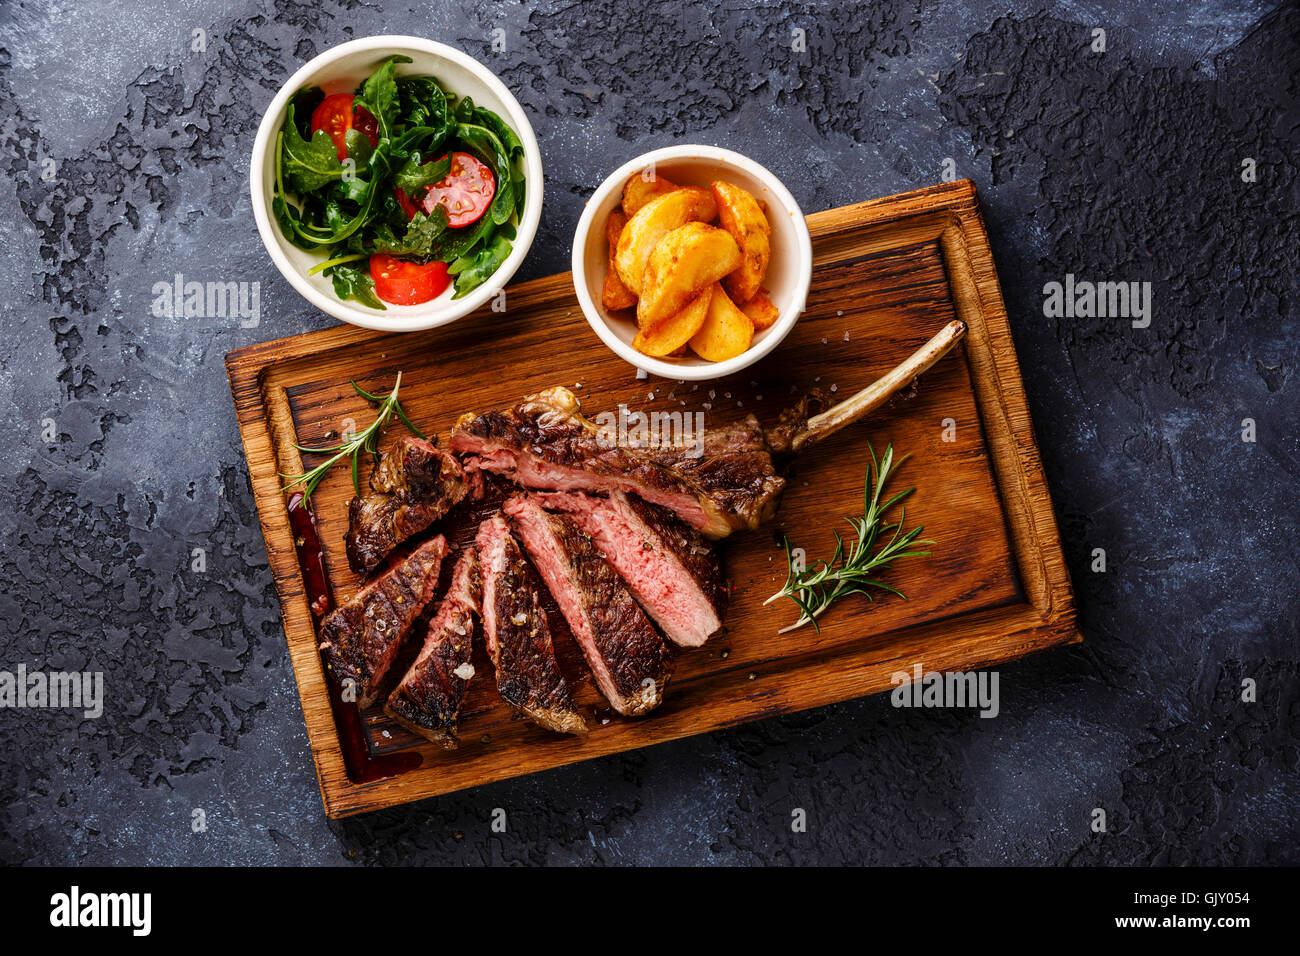 Sliced grilled Medium rare barbecue Steak on bone Veal rib with potato wedges and salad with tomatoes and arugula on dark backgr Stock Photo